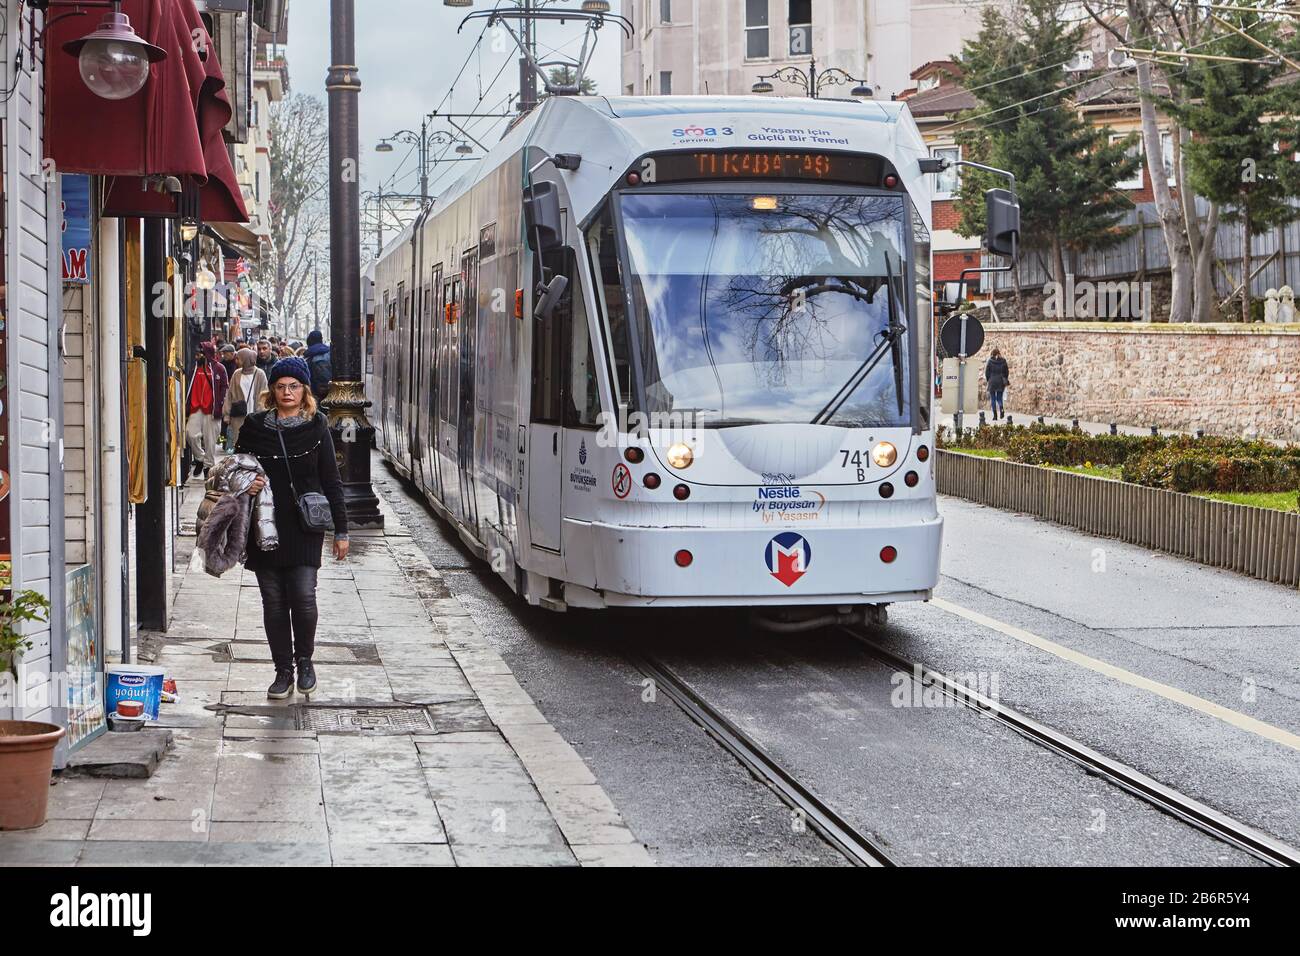 Istanbul, Turkey - February 11, 2020: City public transport Bombardier Flexity Swift tram in the European part of Istanbul. Tramway in the tourist are Stock Photo